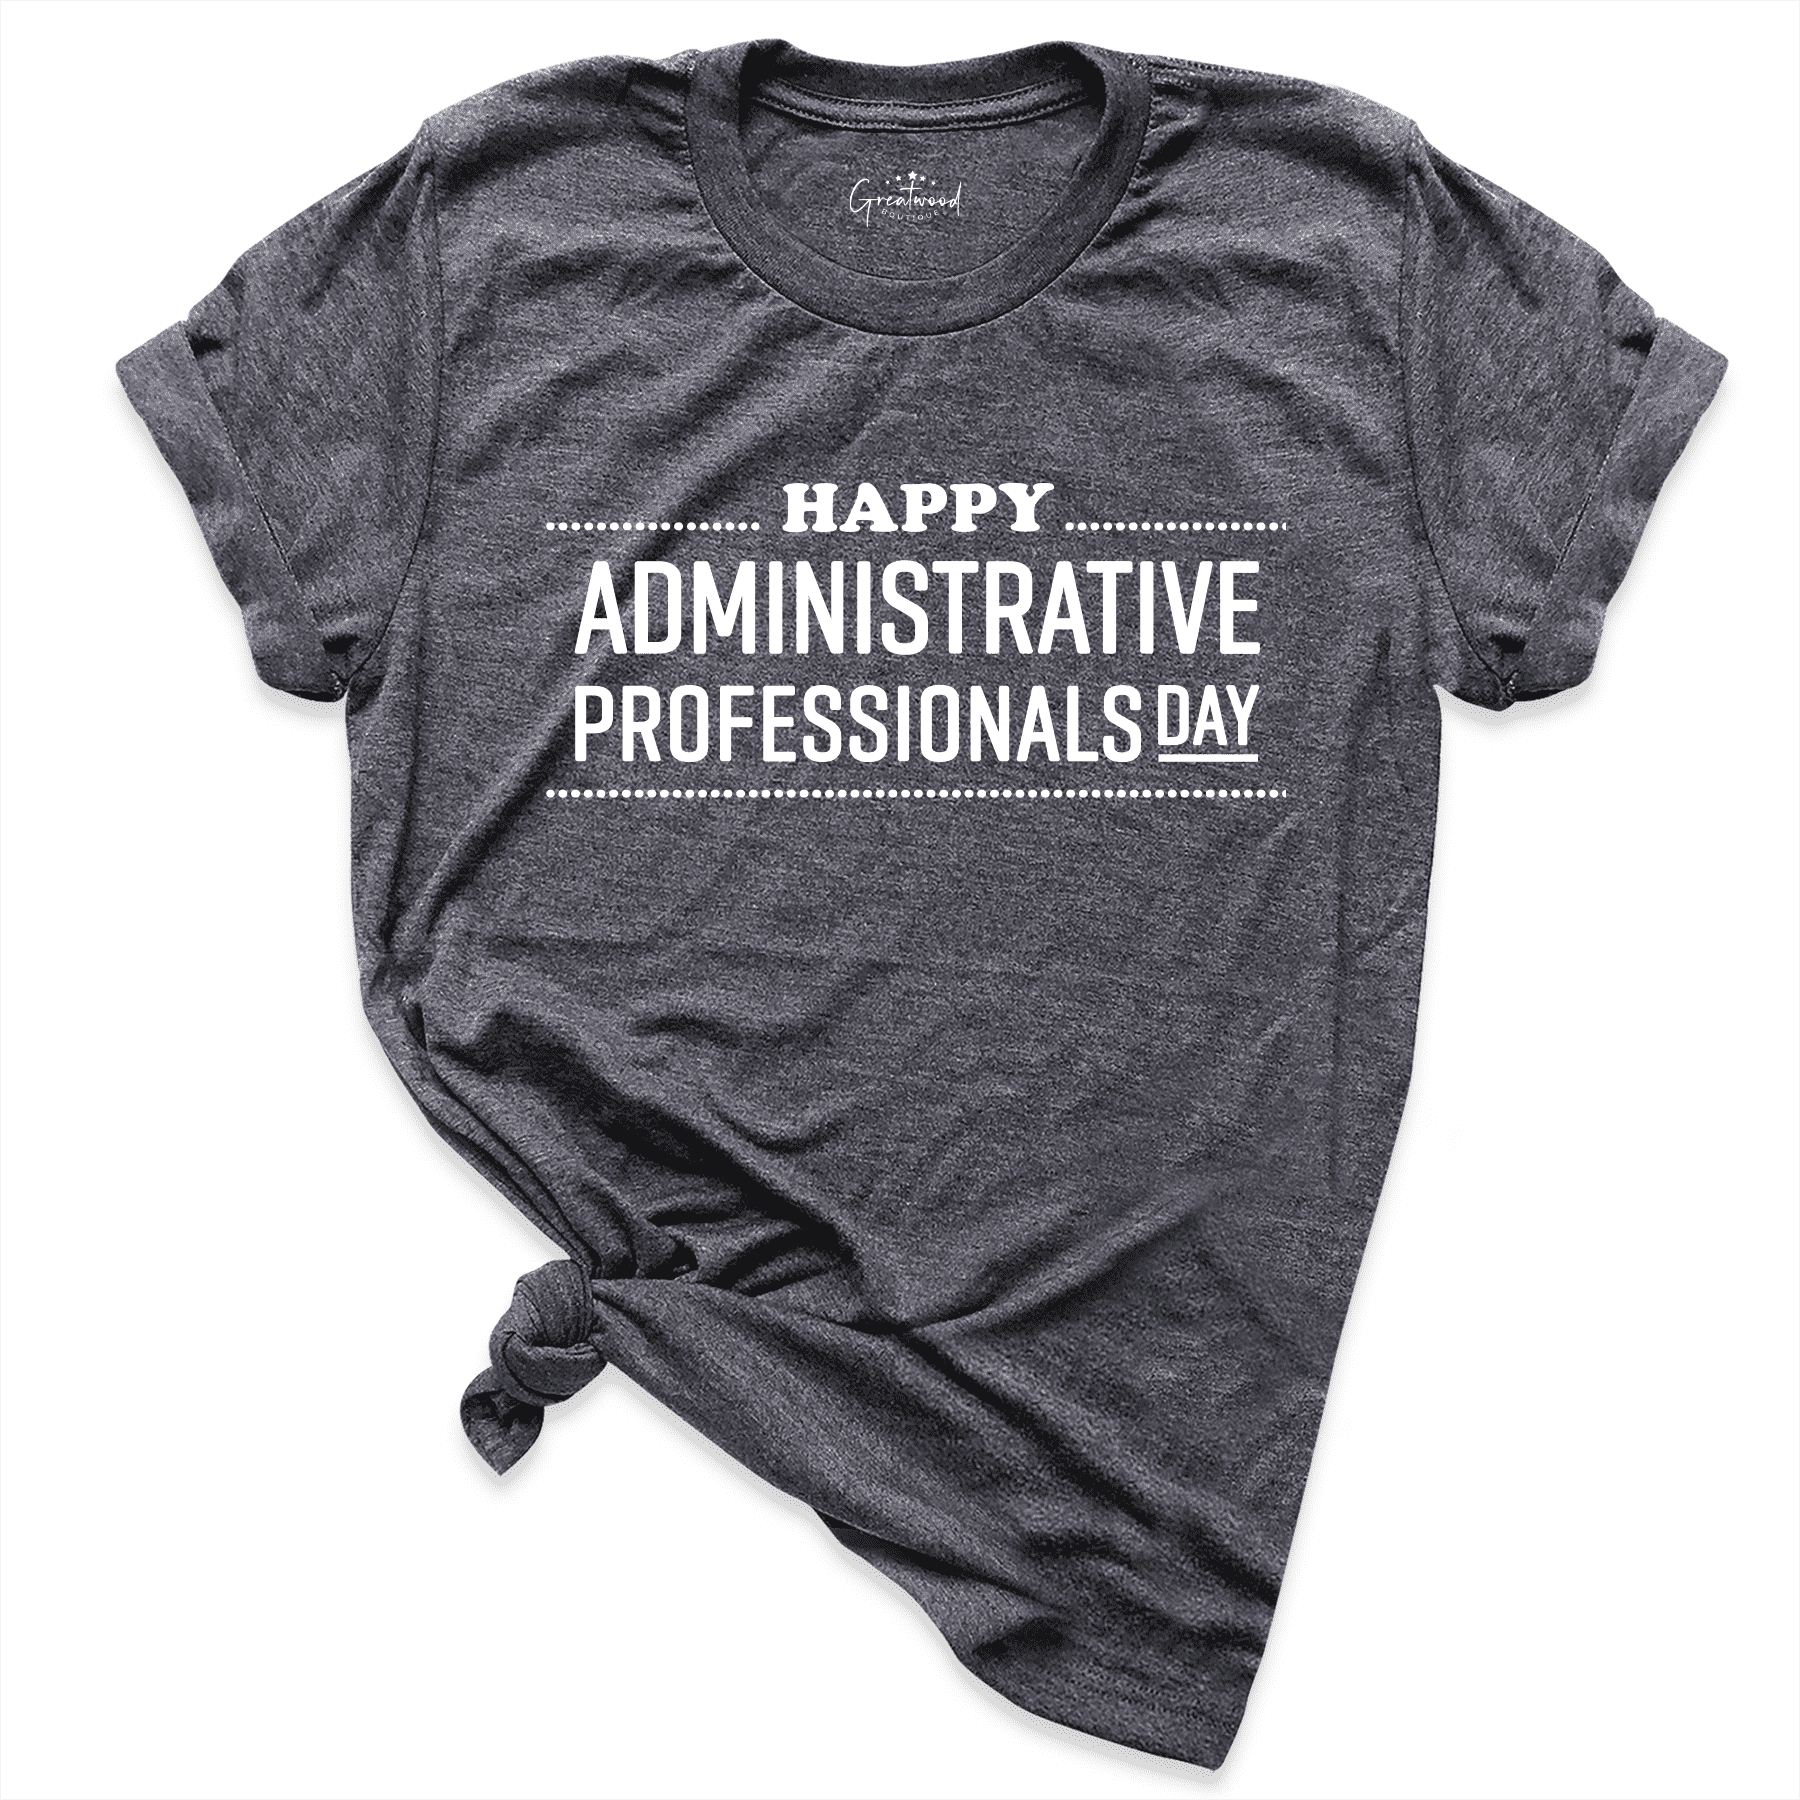 Happy Administrative Professionals Day Shirt D.Grey - Greatwood Boutique